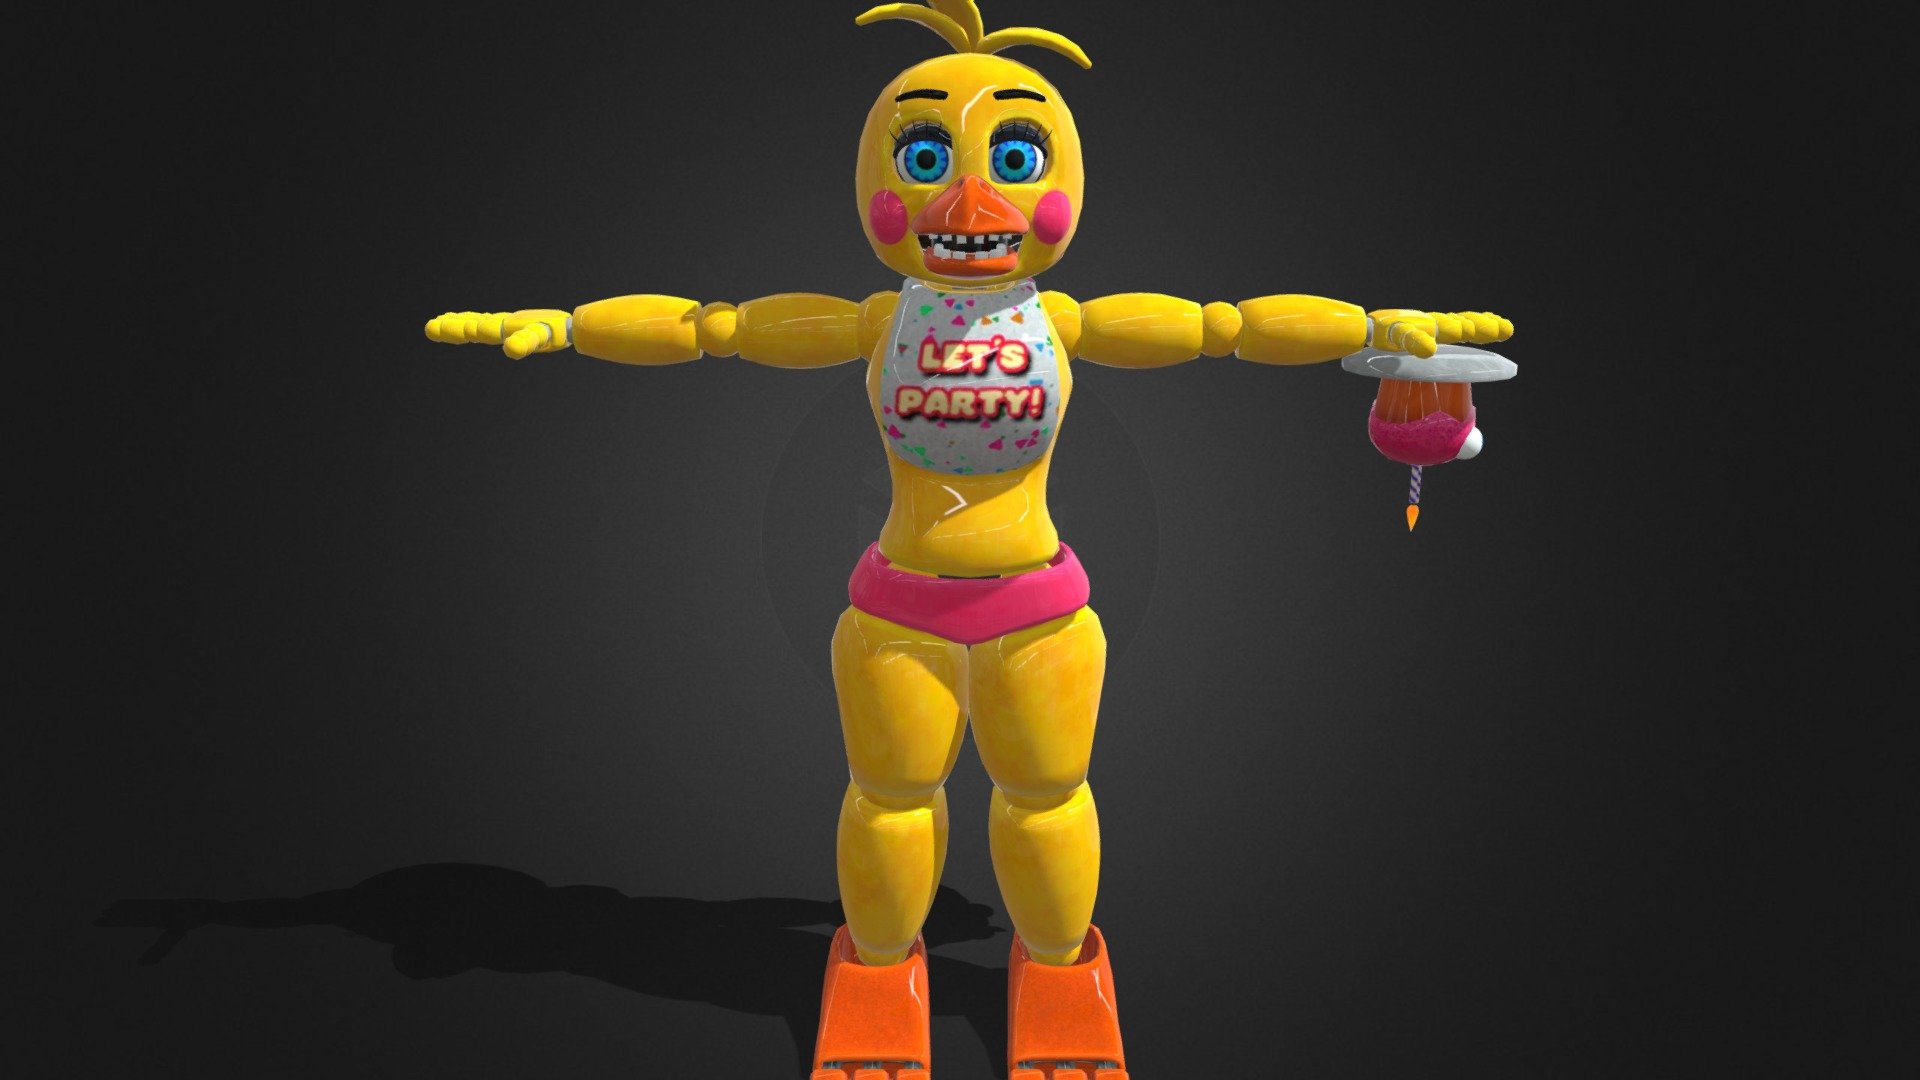 pix Fnaf Ar Highscore Toy Chica toy chica fnaf ar download free 3d.